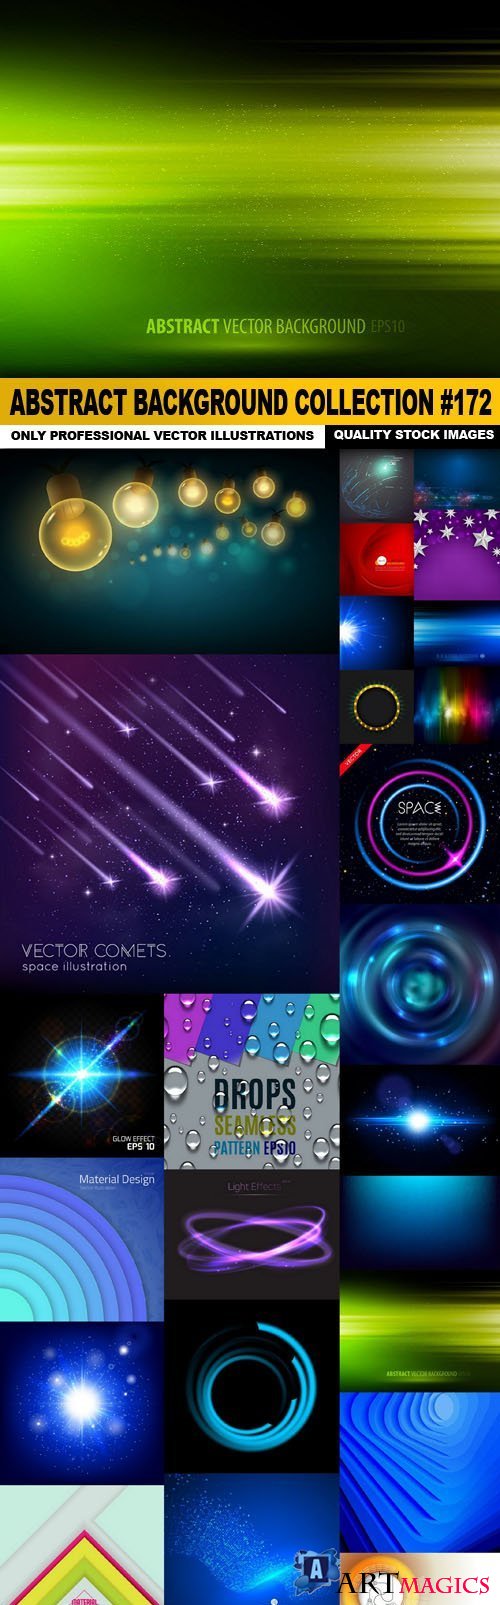 Abstract Background Collection #172 - 25 Vector